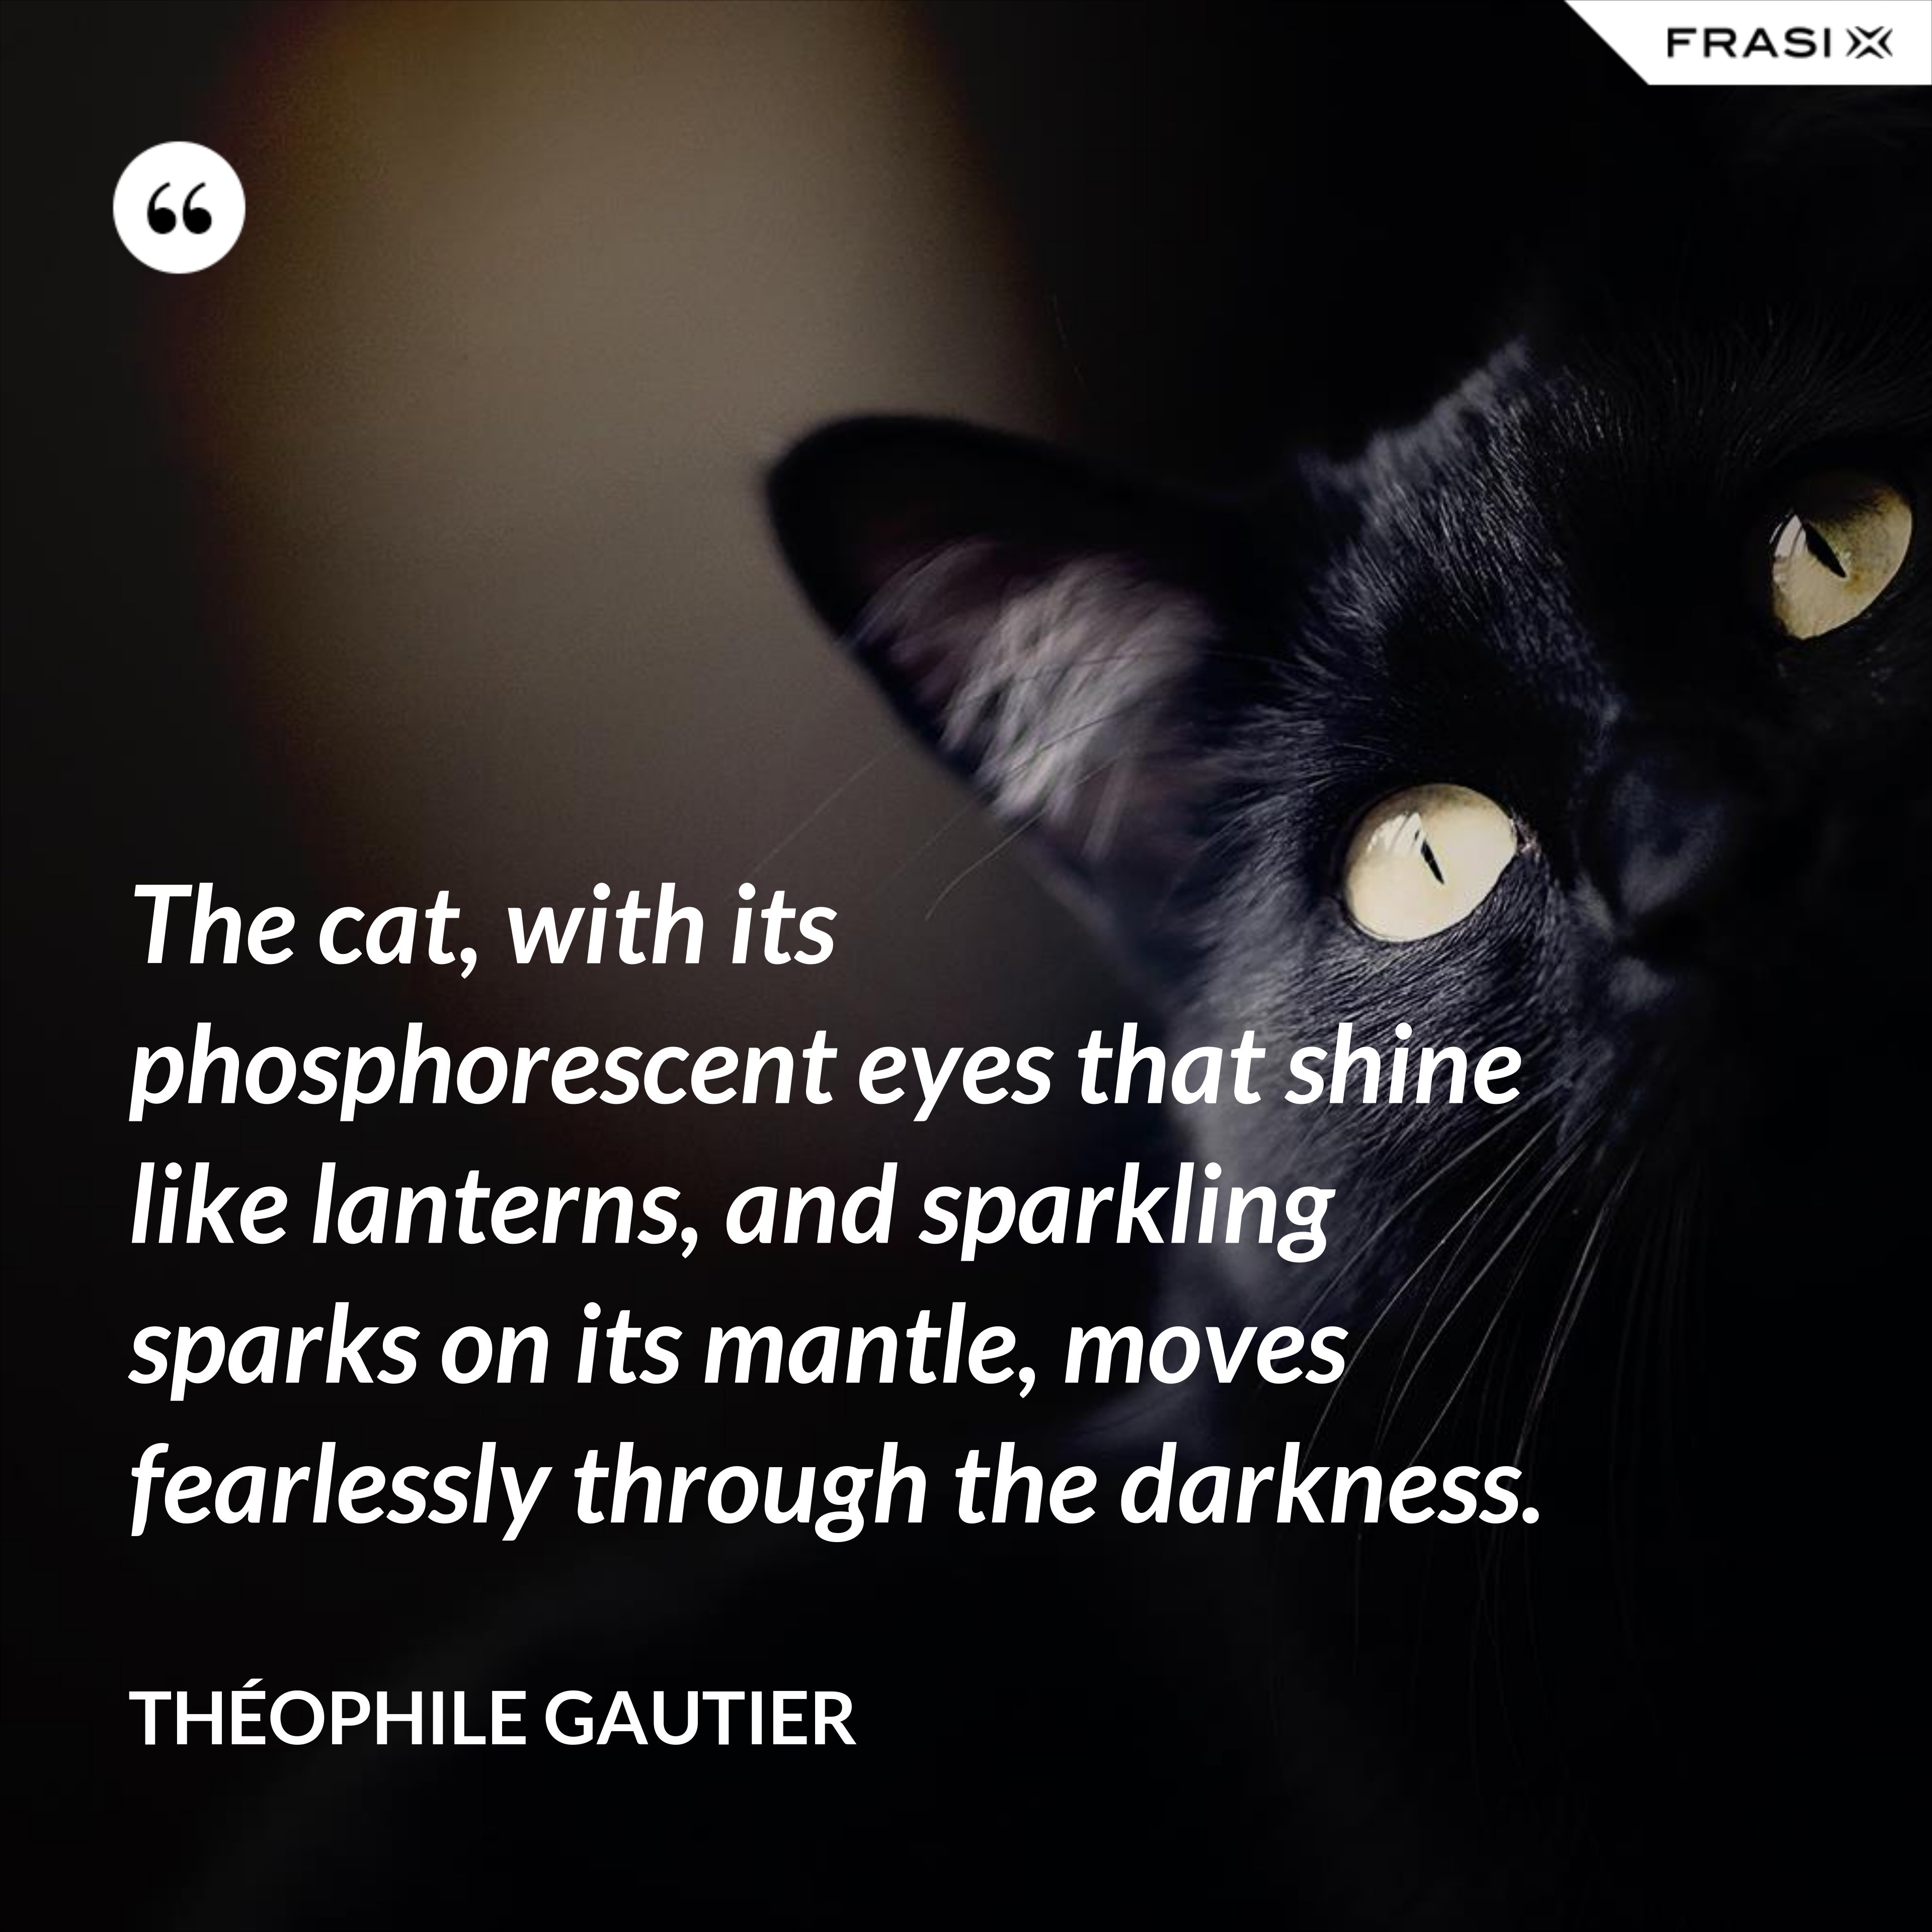 The cat, with its phosphorescent eyes that shine like lanterns, and sparkling sparks on its mantle, moves fearlessly through the darkness. - Théophile Gautier